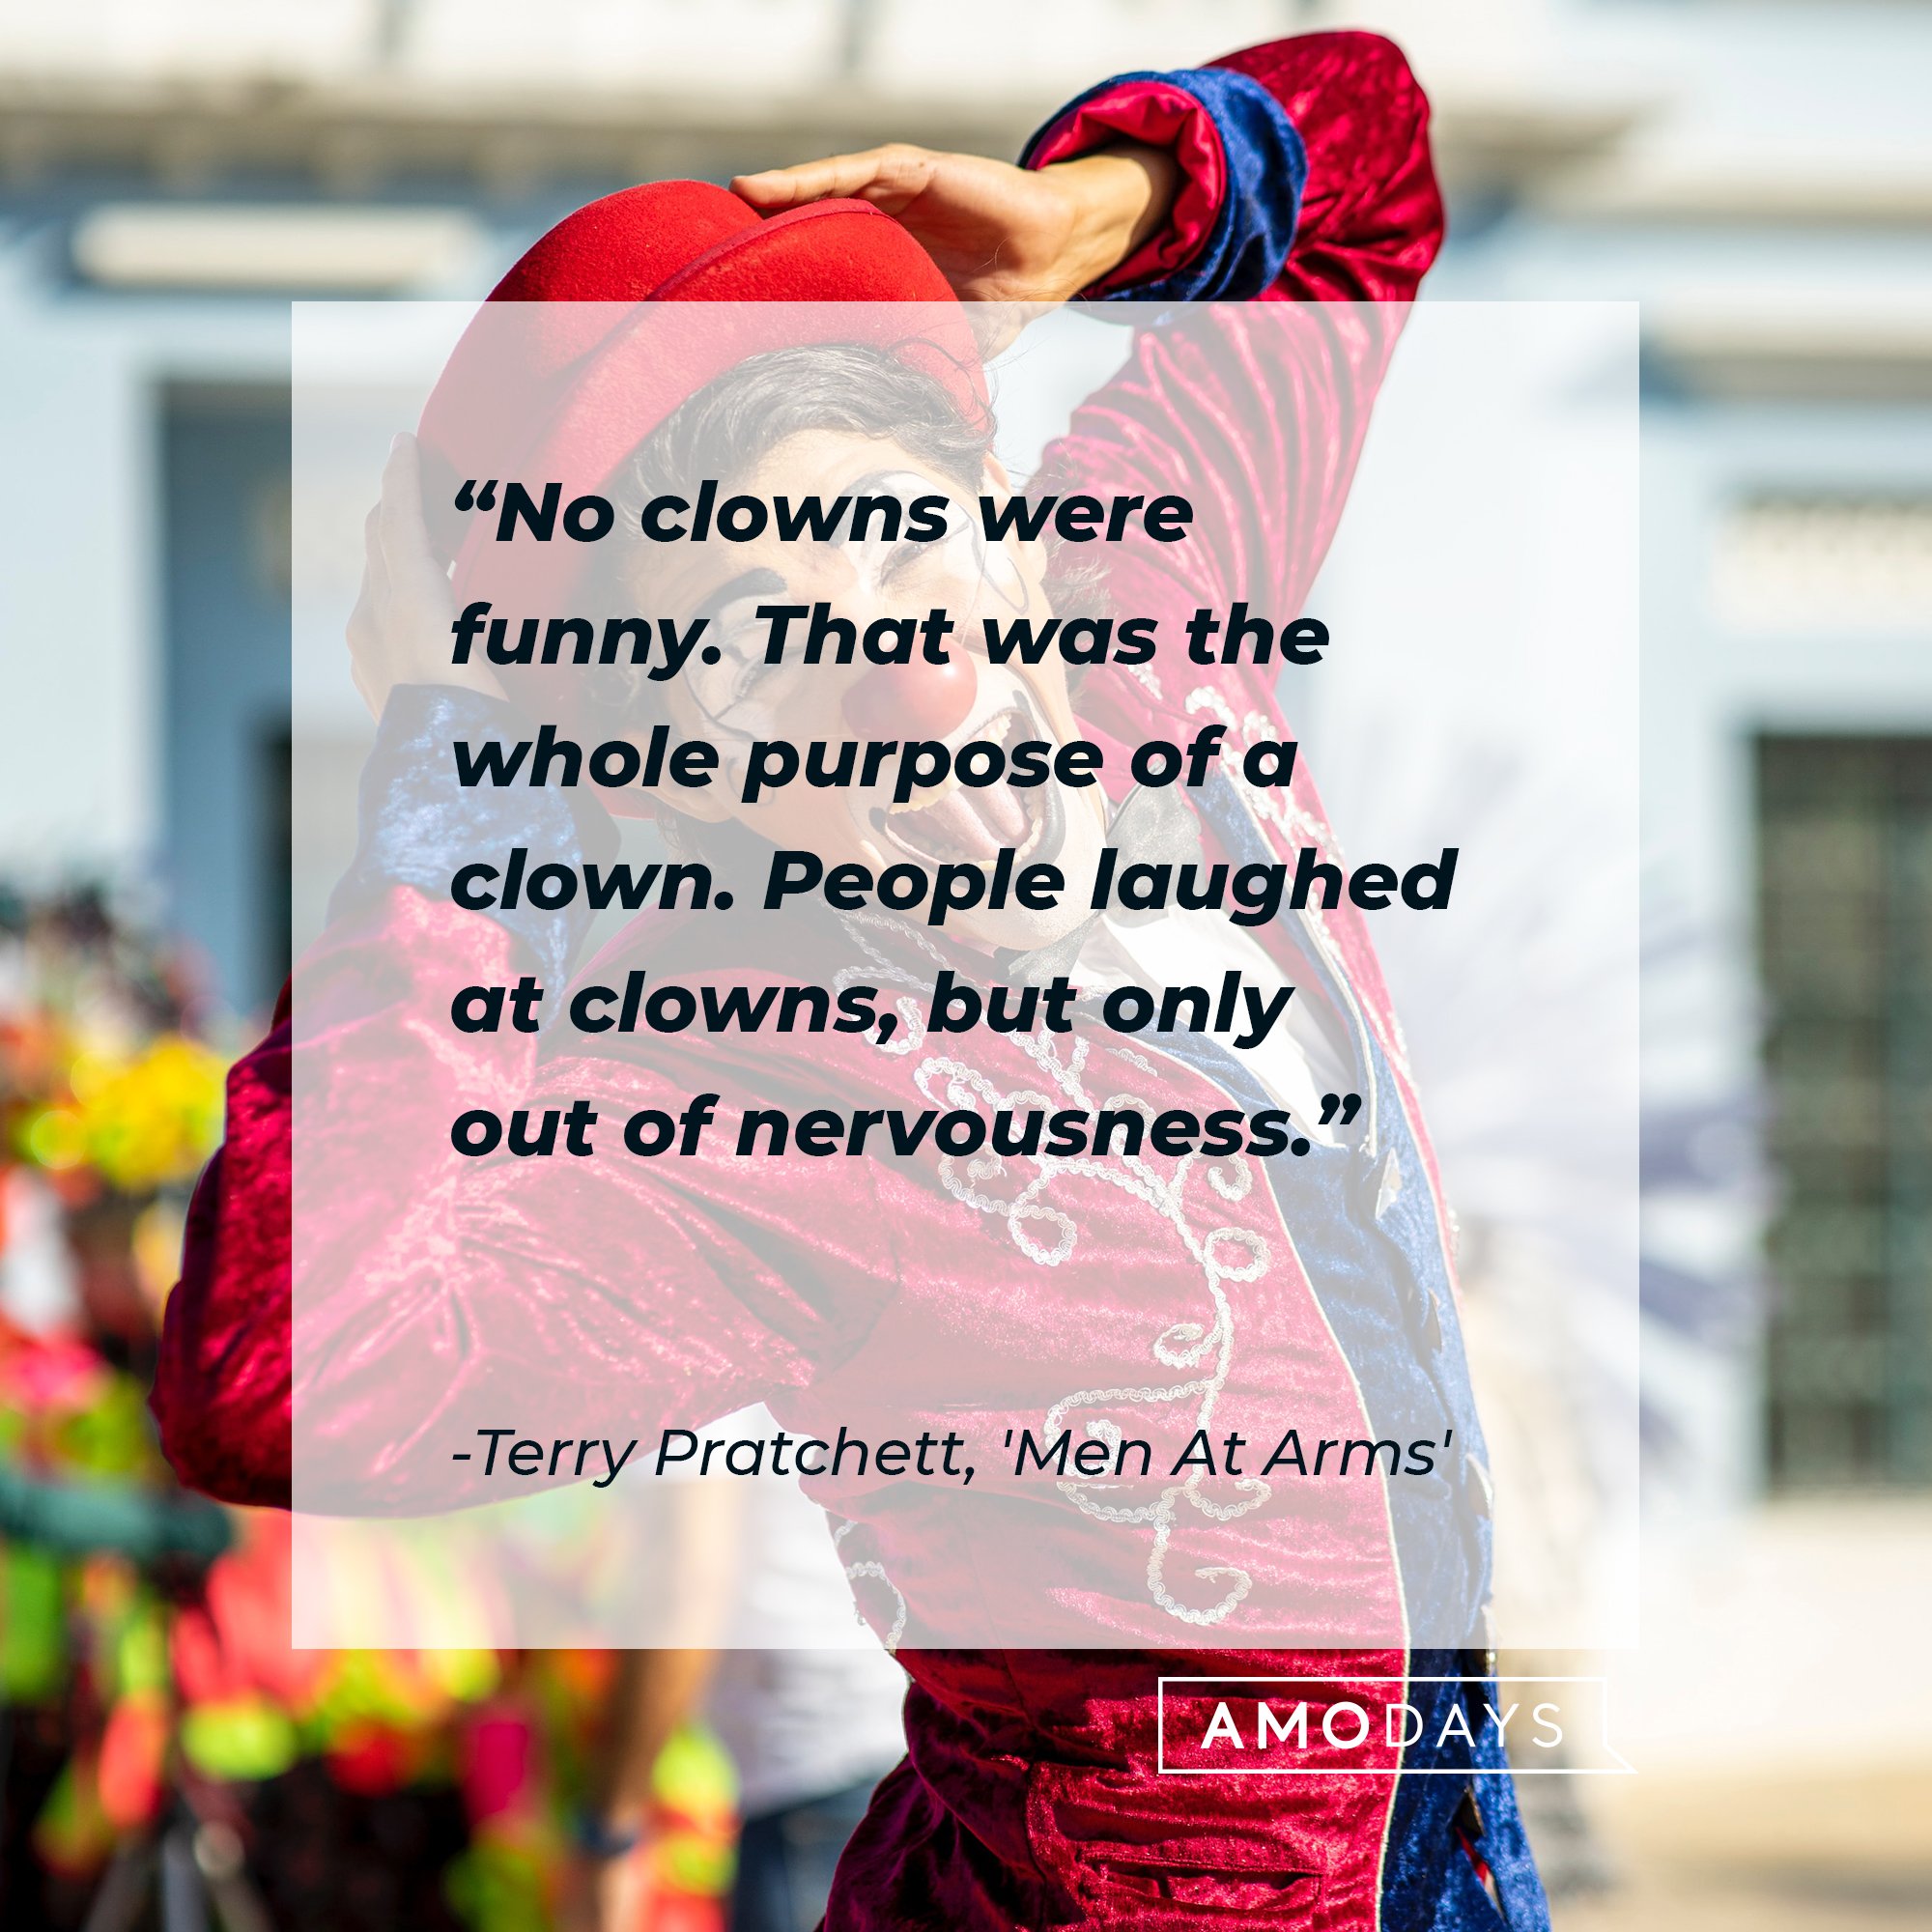  Terry Pratchett's quote "No clowns were funny. That was the whole purpose of a clown. People laughed at clowns, but only out of nervousness." | Source: Unsplash.com